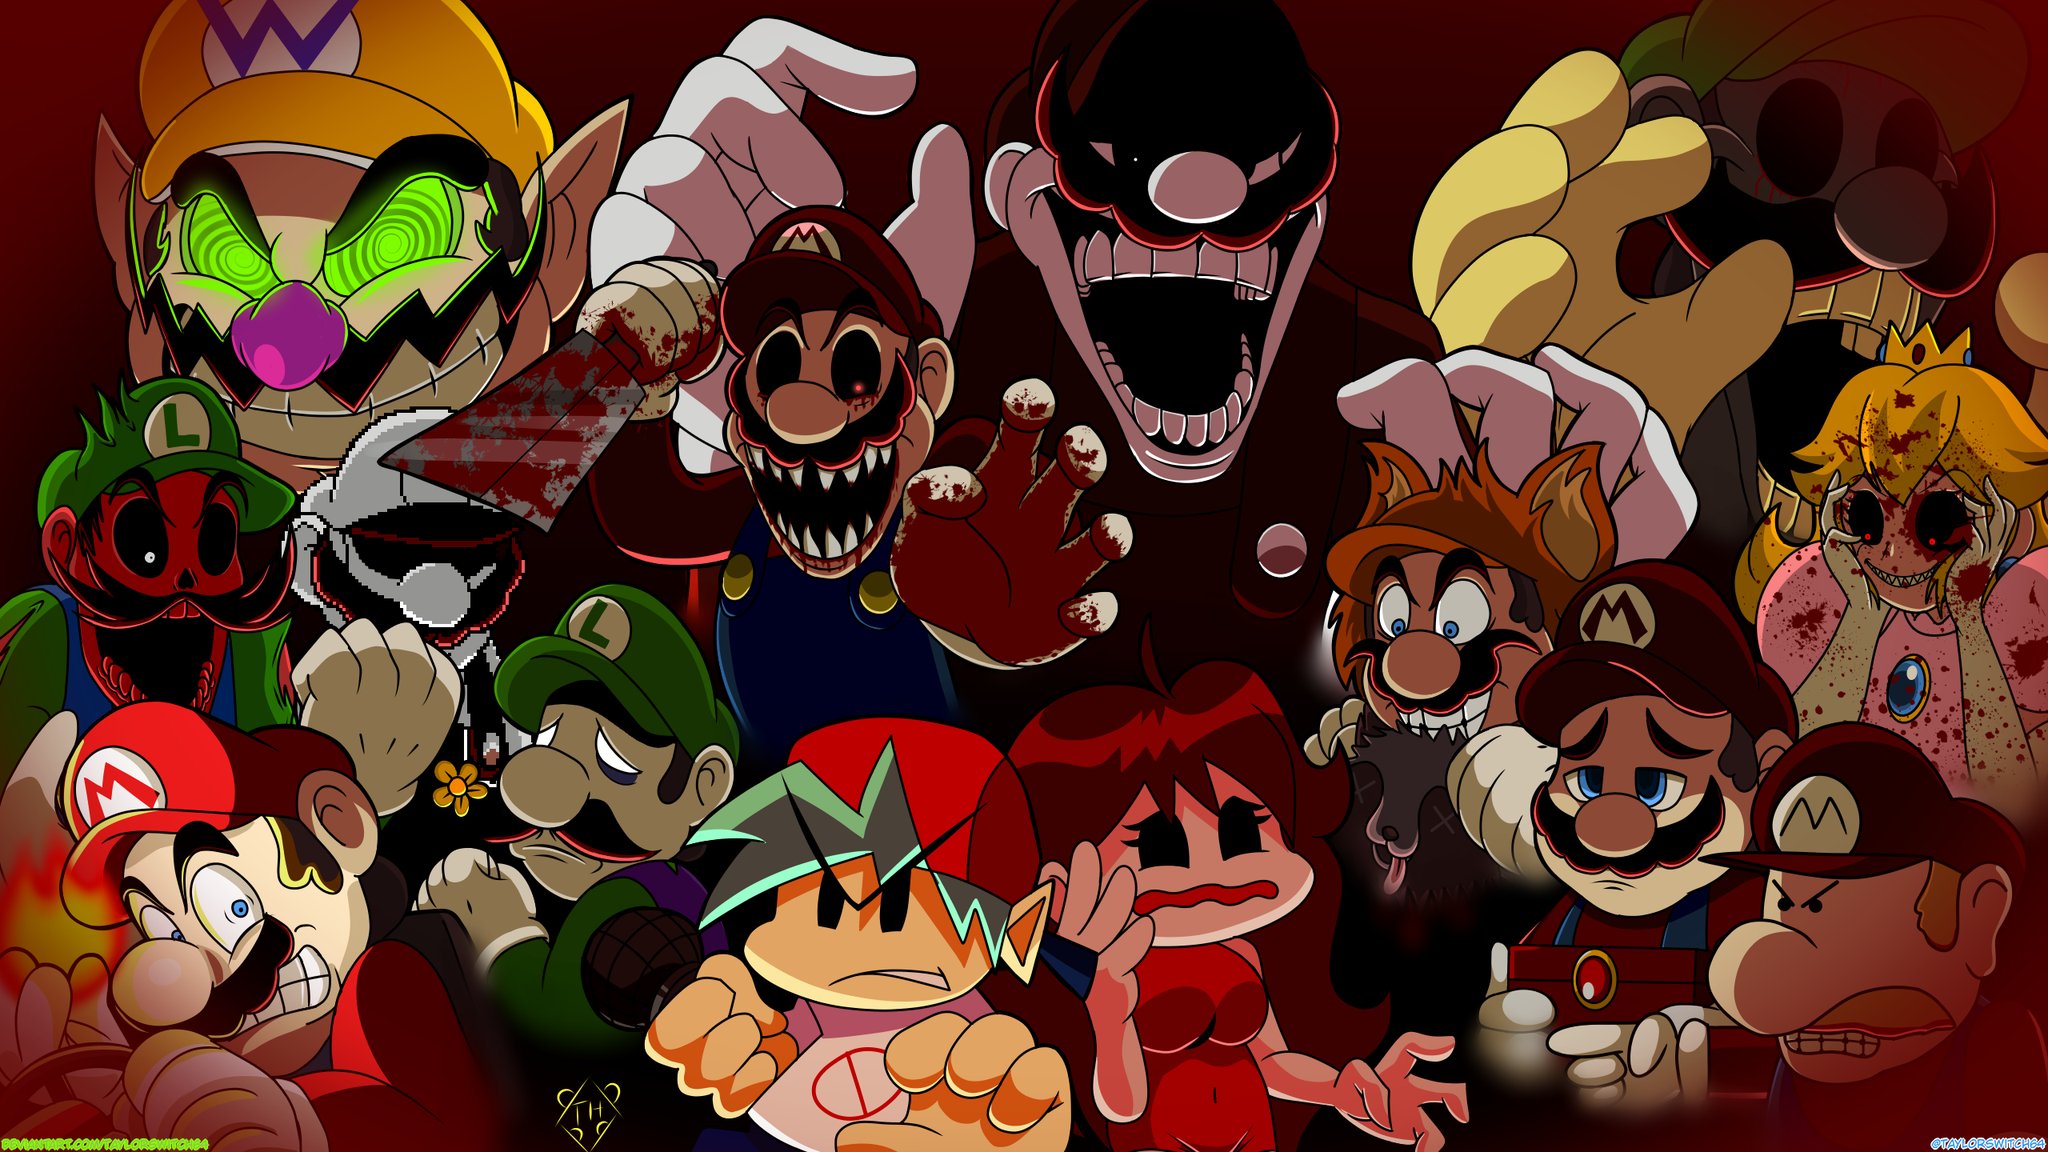 Taylor Hall Might Do Another One, But Not For A While. Are There Any Other Mario.exe Horror Mario Characters That Are Left Out That Deserves Some Recognition In FNF Mario's